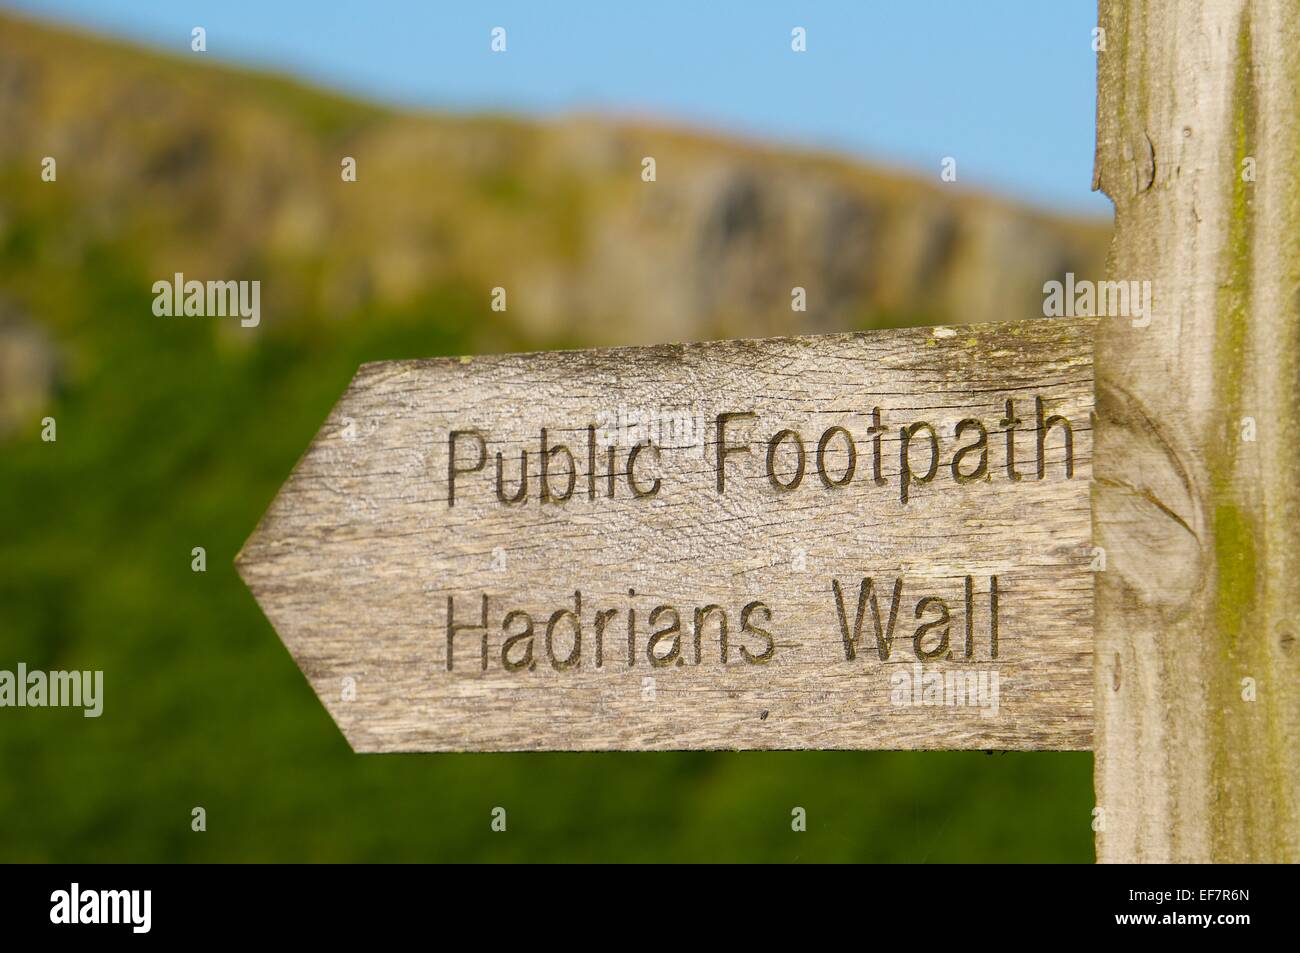 Finger sign post of public footpath on Hadrian’s Wall National Trail, Northumberland, England, UK. Stock Photo